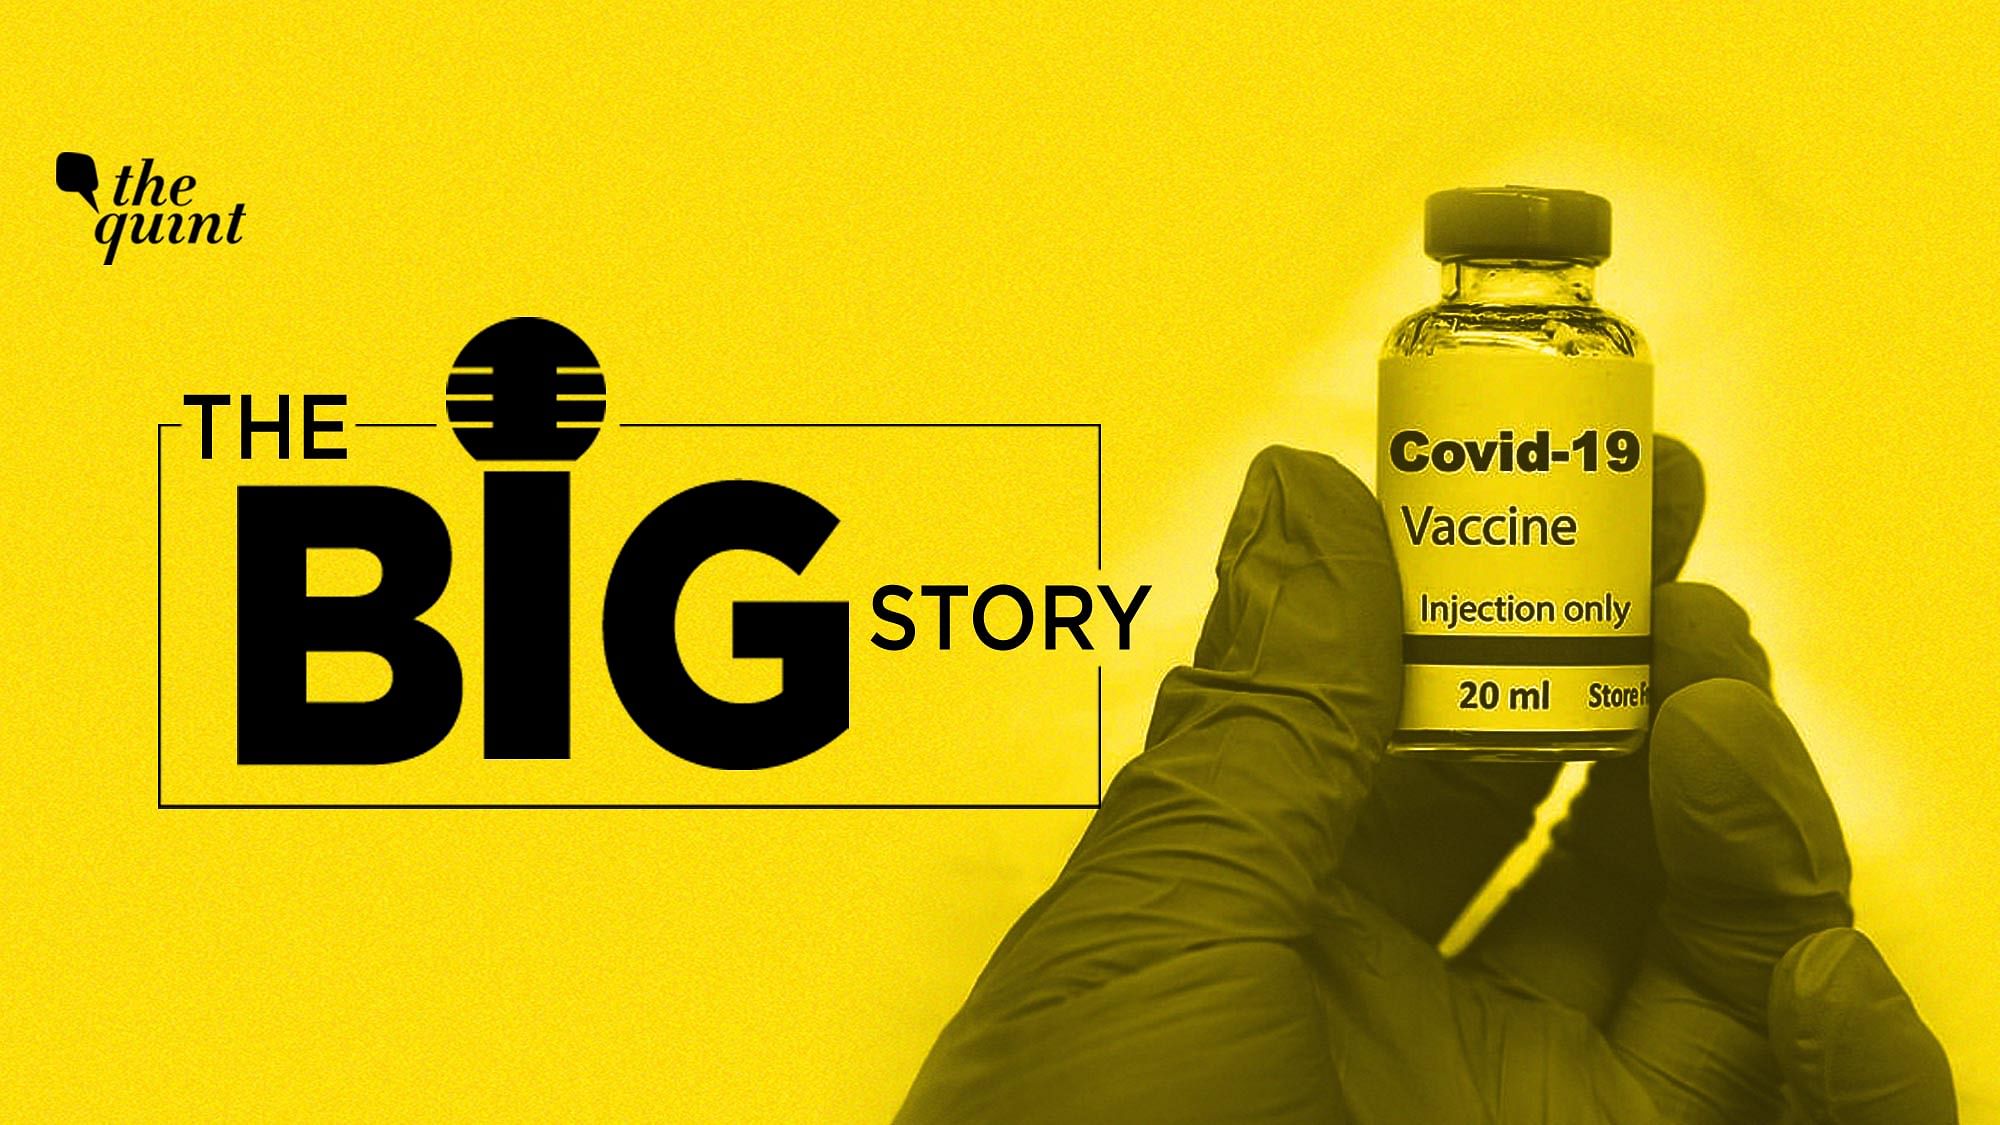  Recently, the COVID-19 vaccine being developed by the University of Oxford and Swedish-British pharma AstraZeneca was announced to have 70 percent efficacy after a large-scale trial.